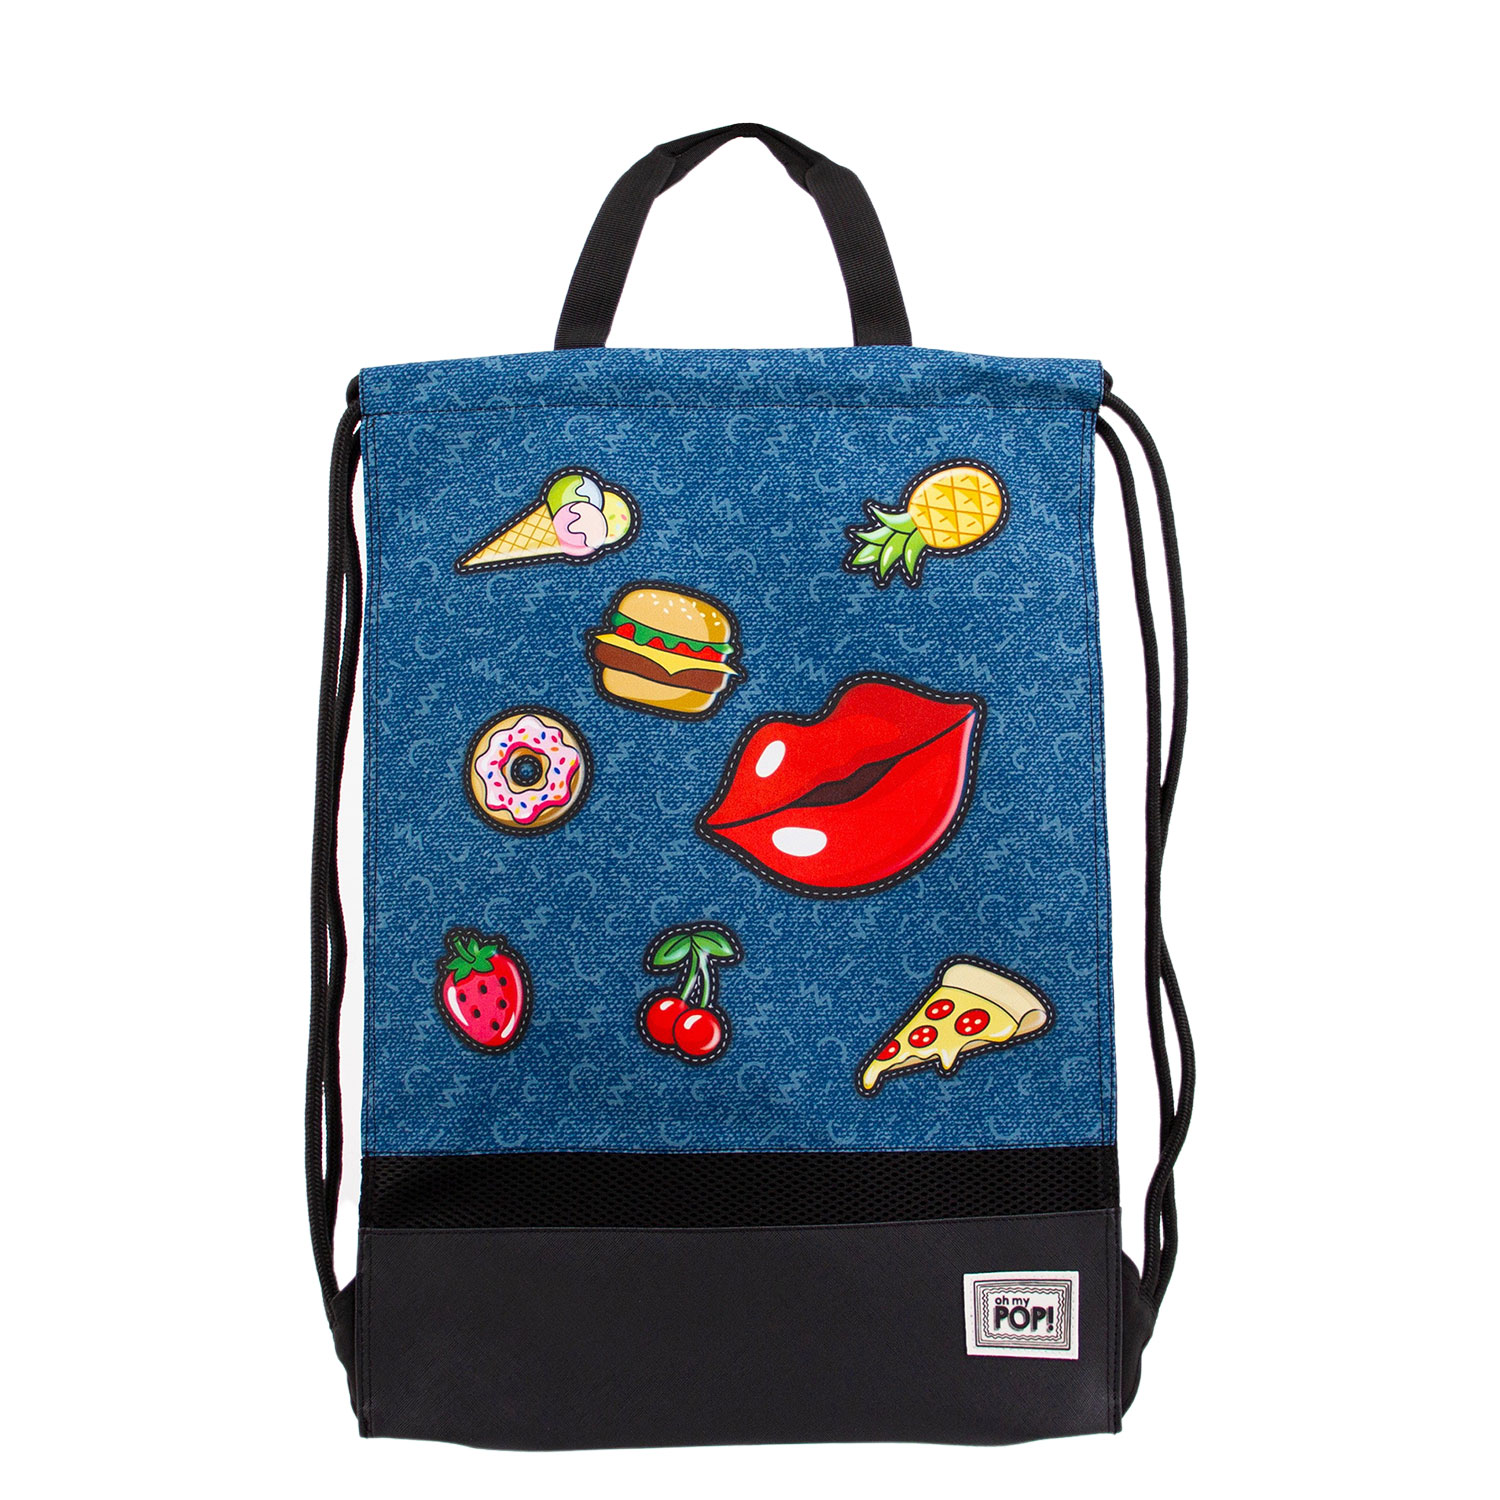 Storm Gymsack with Handles Oh My Pop! Patches